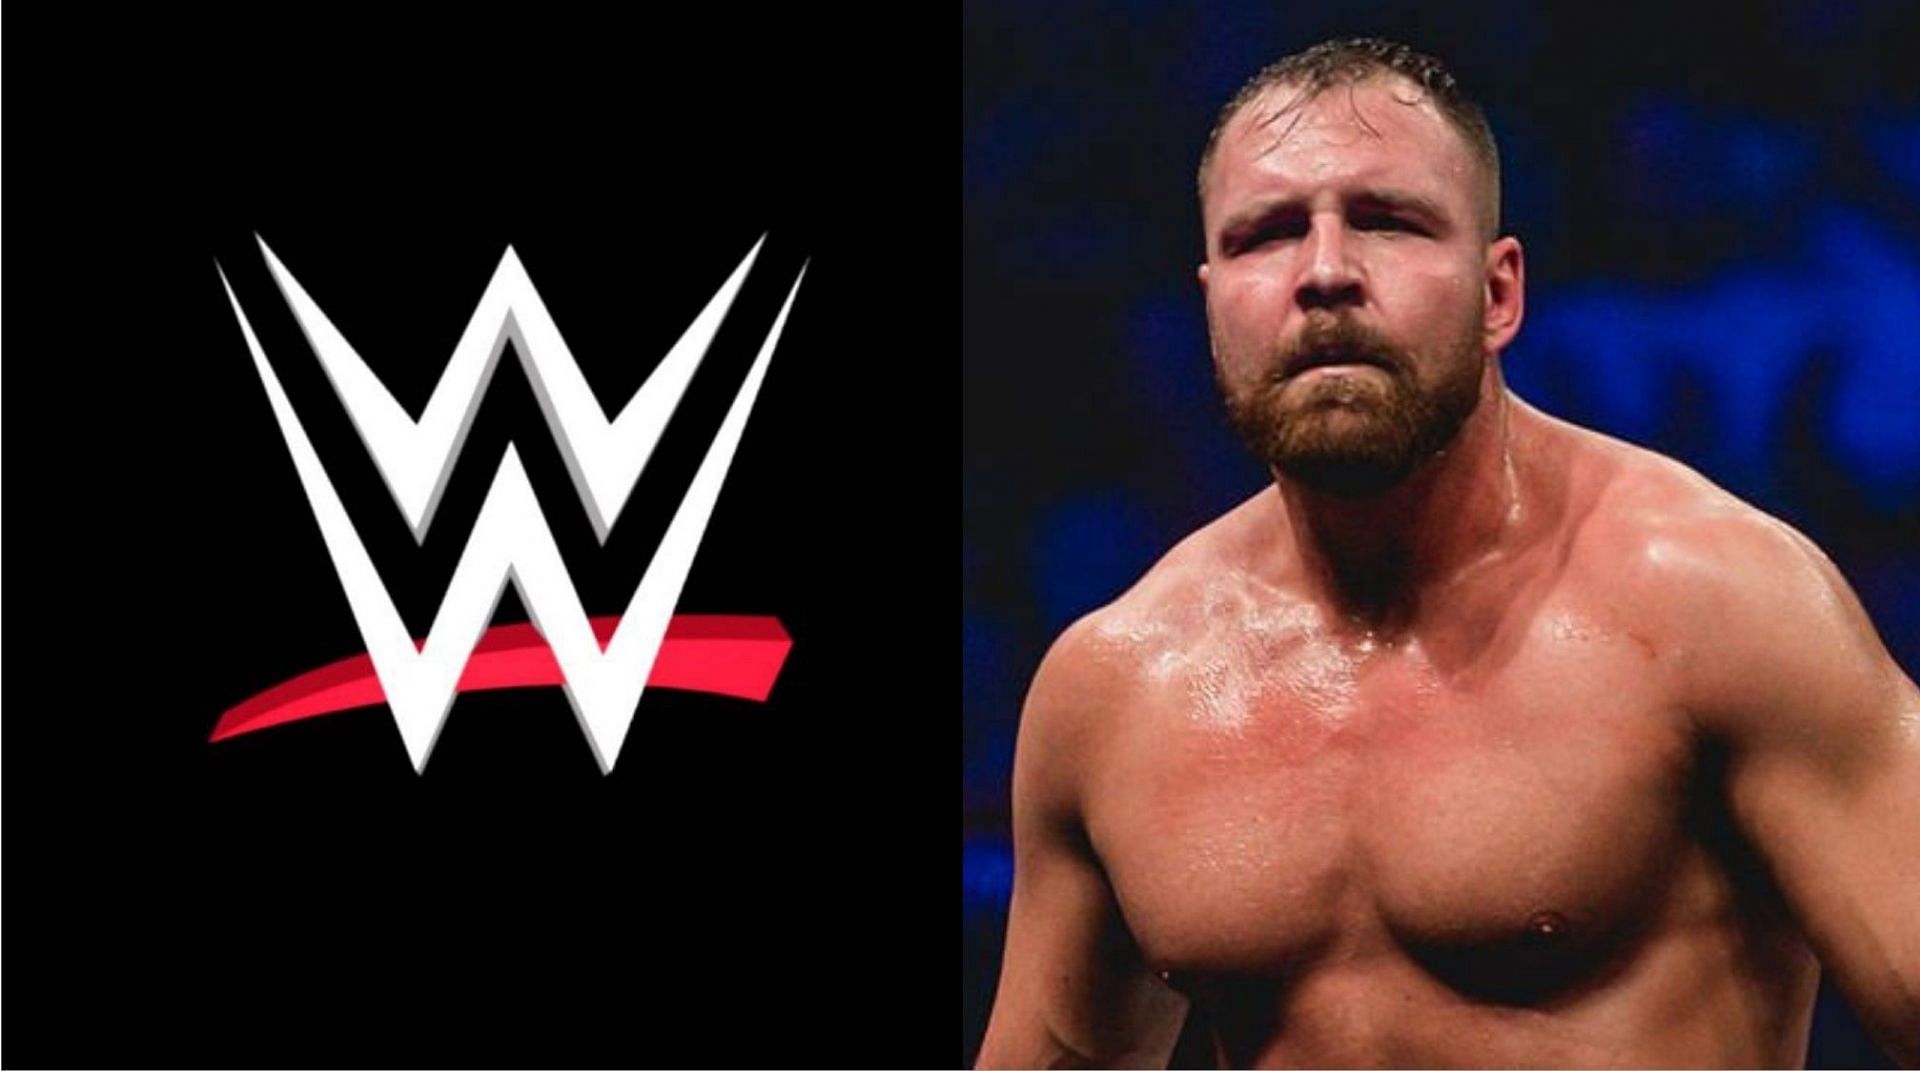 Jon Moxley is a former WWE Superstar who found his way to AEW in 2019